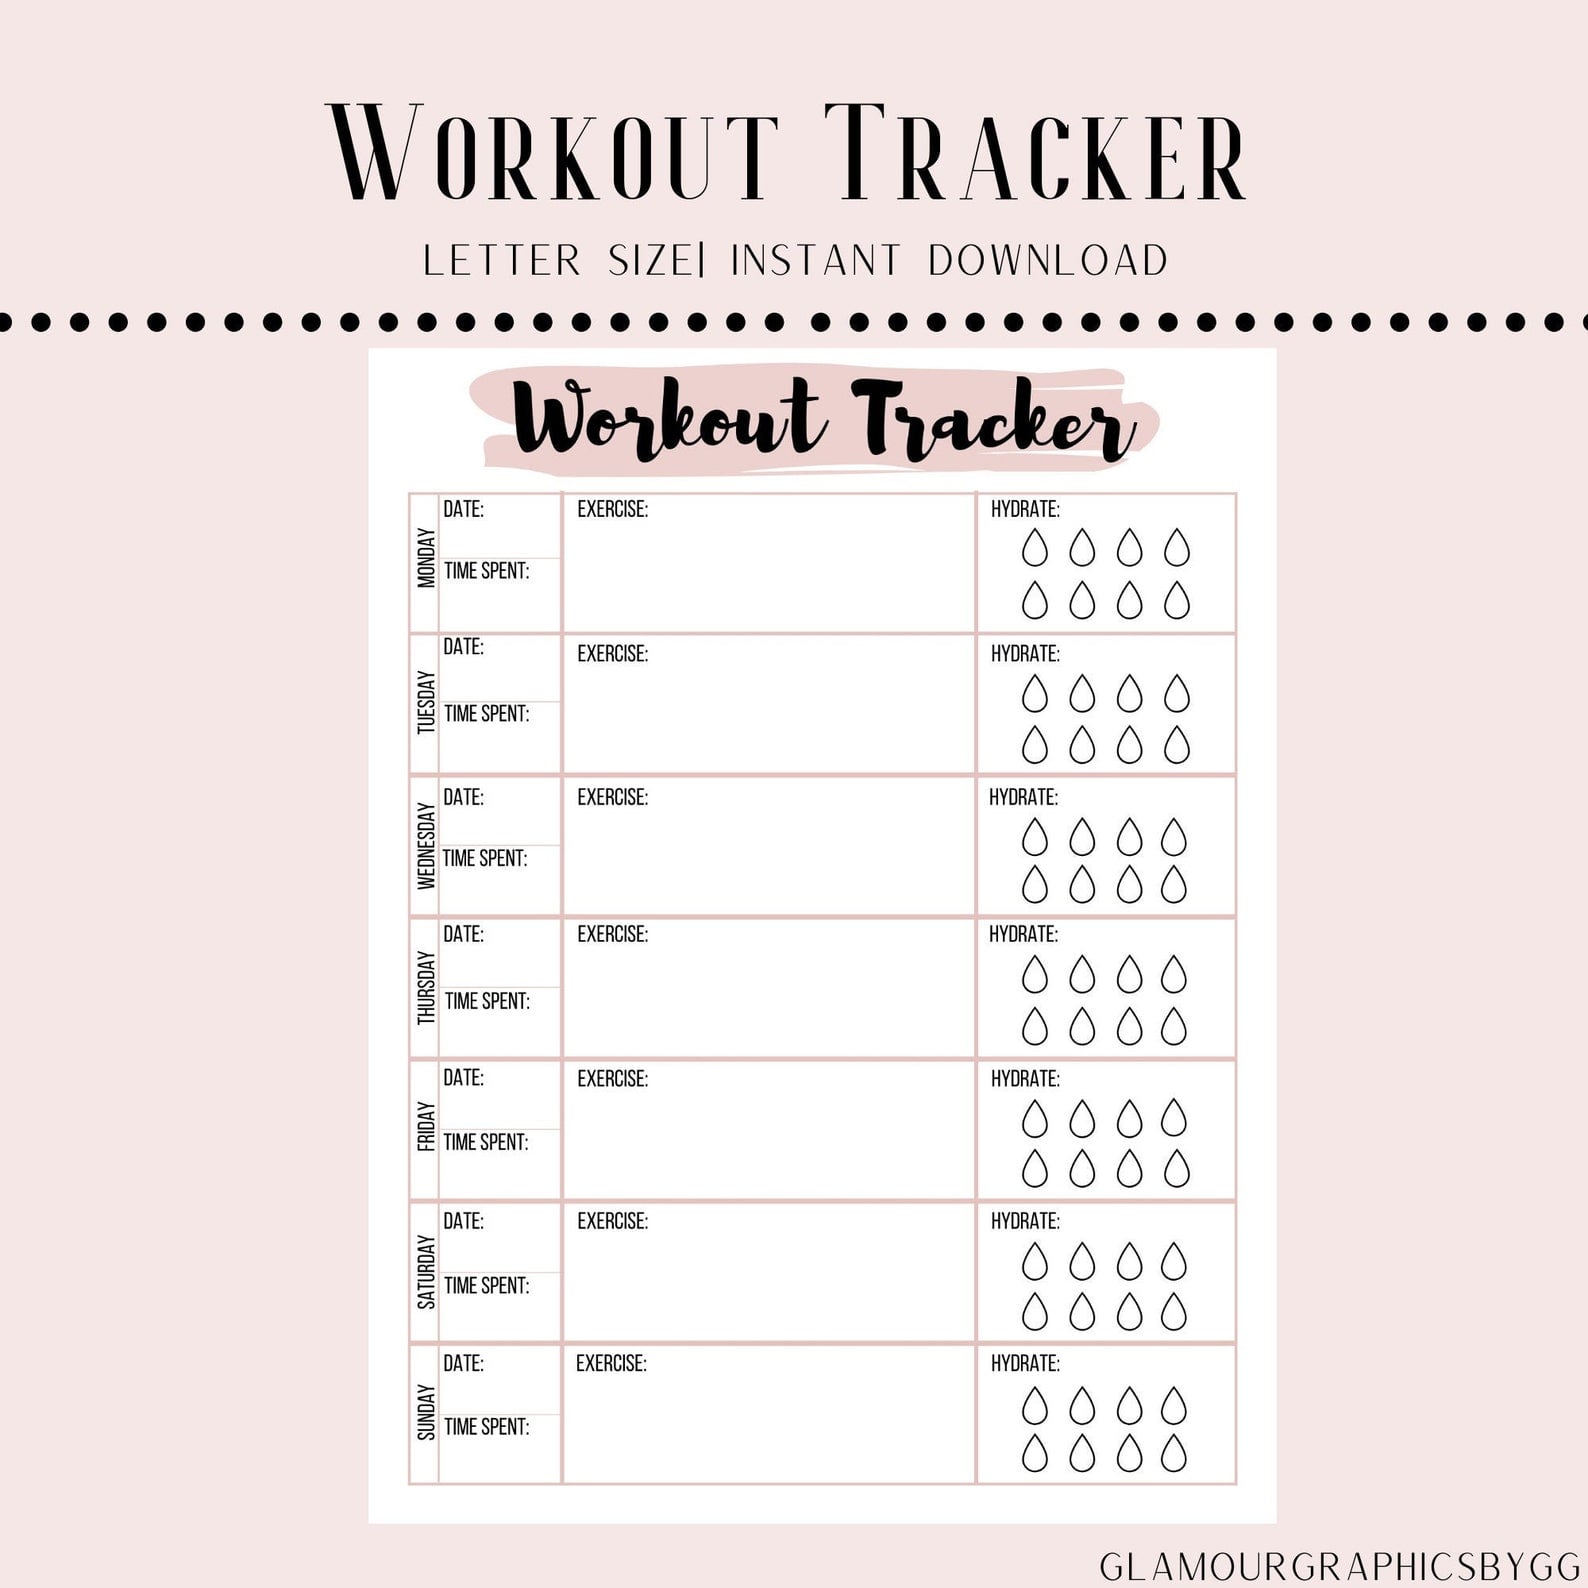 a5-workout-routine-planner-and-tracker-with-monthly-log-sweden-ubicaciondepersonas-cdmx-gob-mx